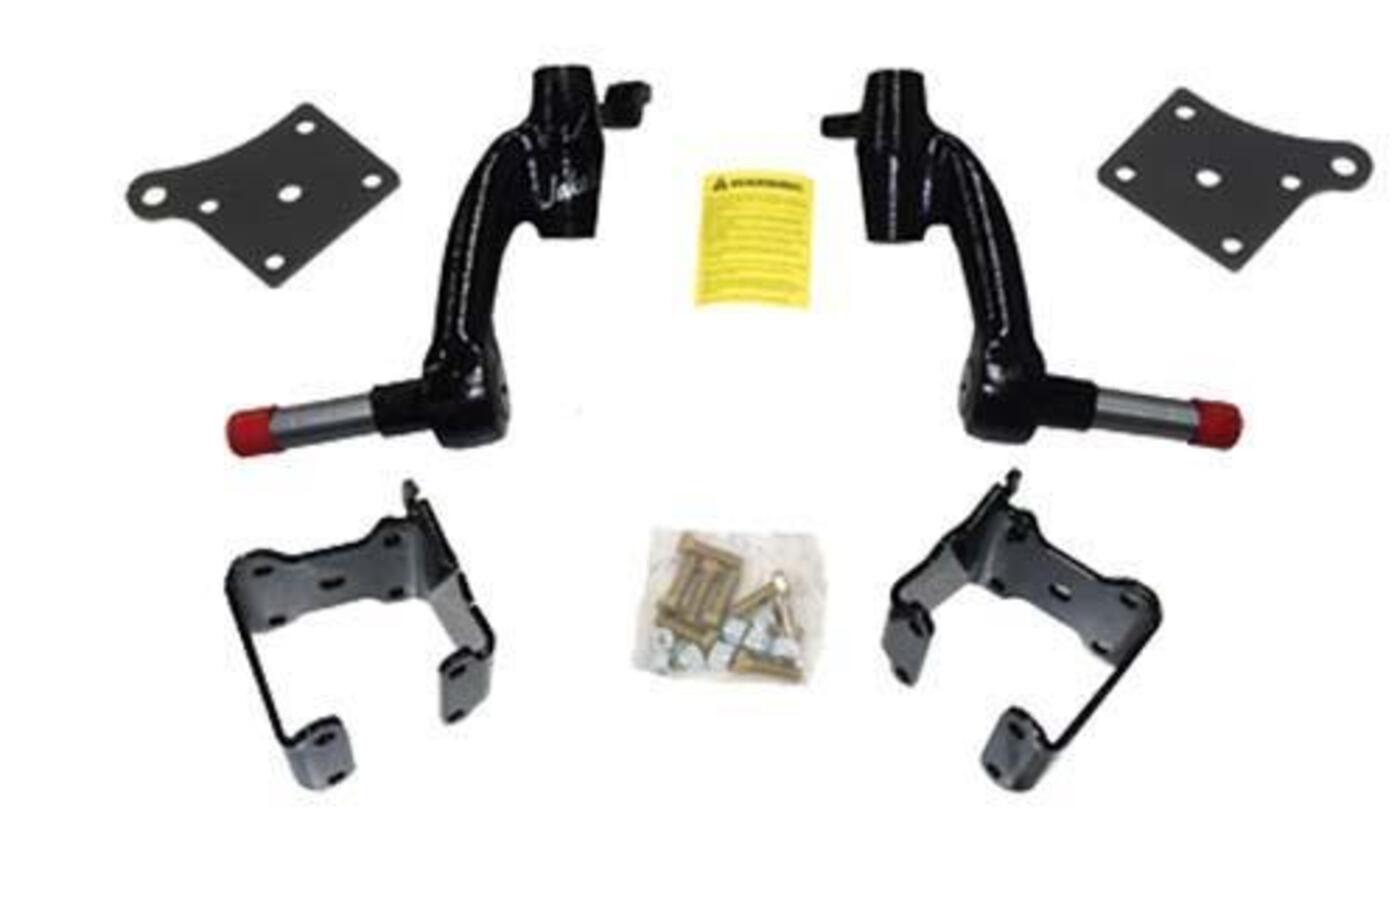 Jake's 6" E-Z-GO Workhorse Gas Spindle Lift Kit Years 2001.5-2008.5